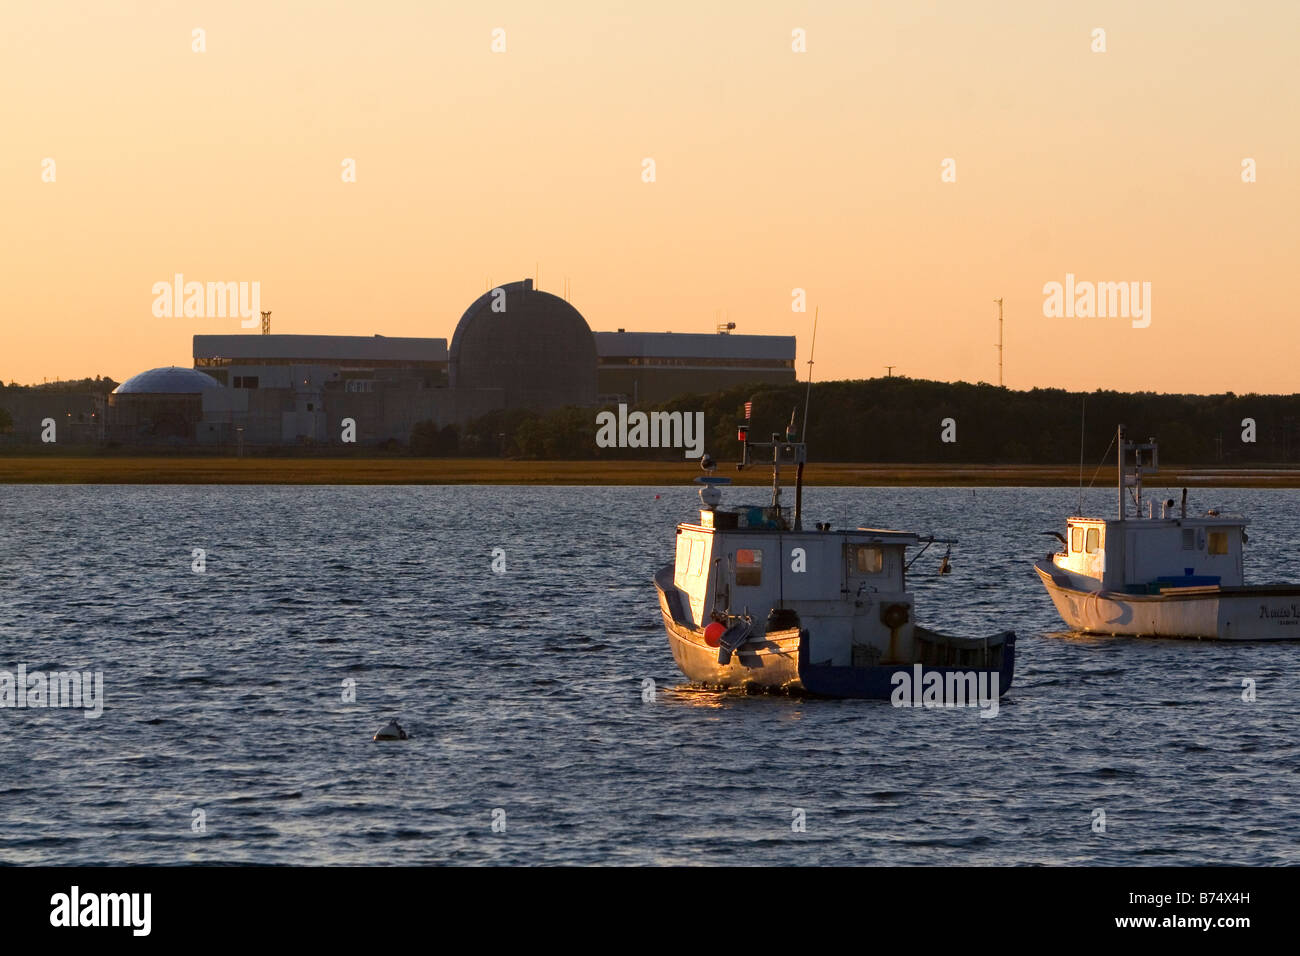 Seabrook Nuclear Power Plant located in Seabrook New Hampshire USA Stock Photo